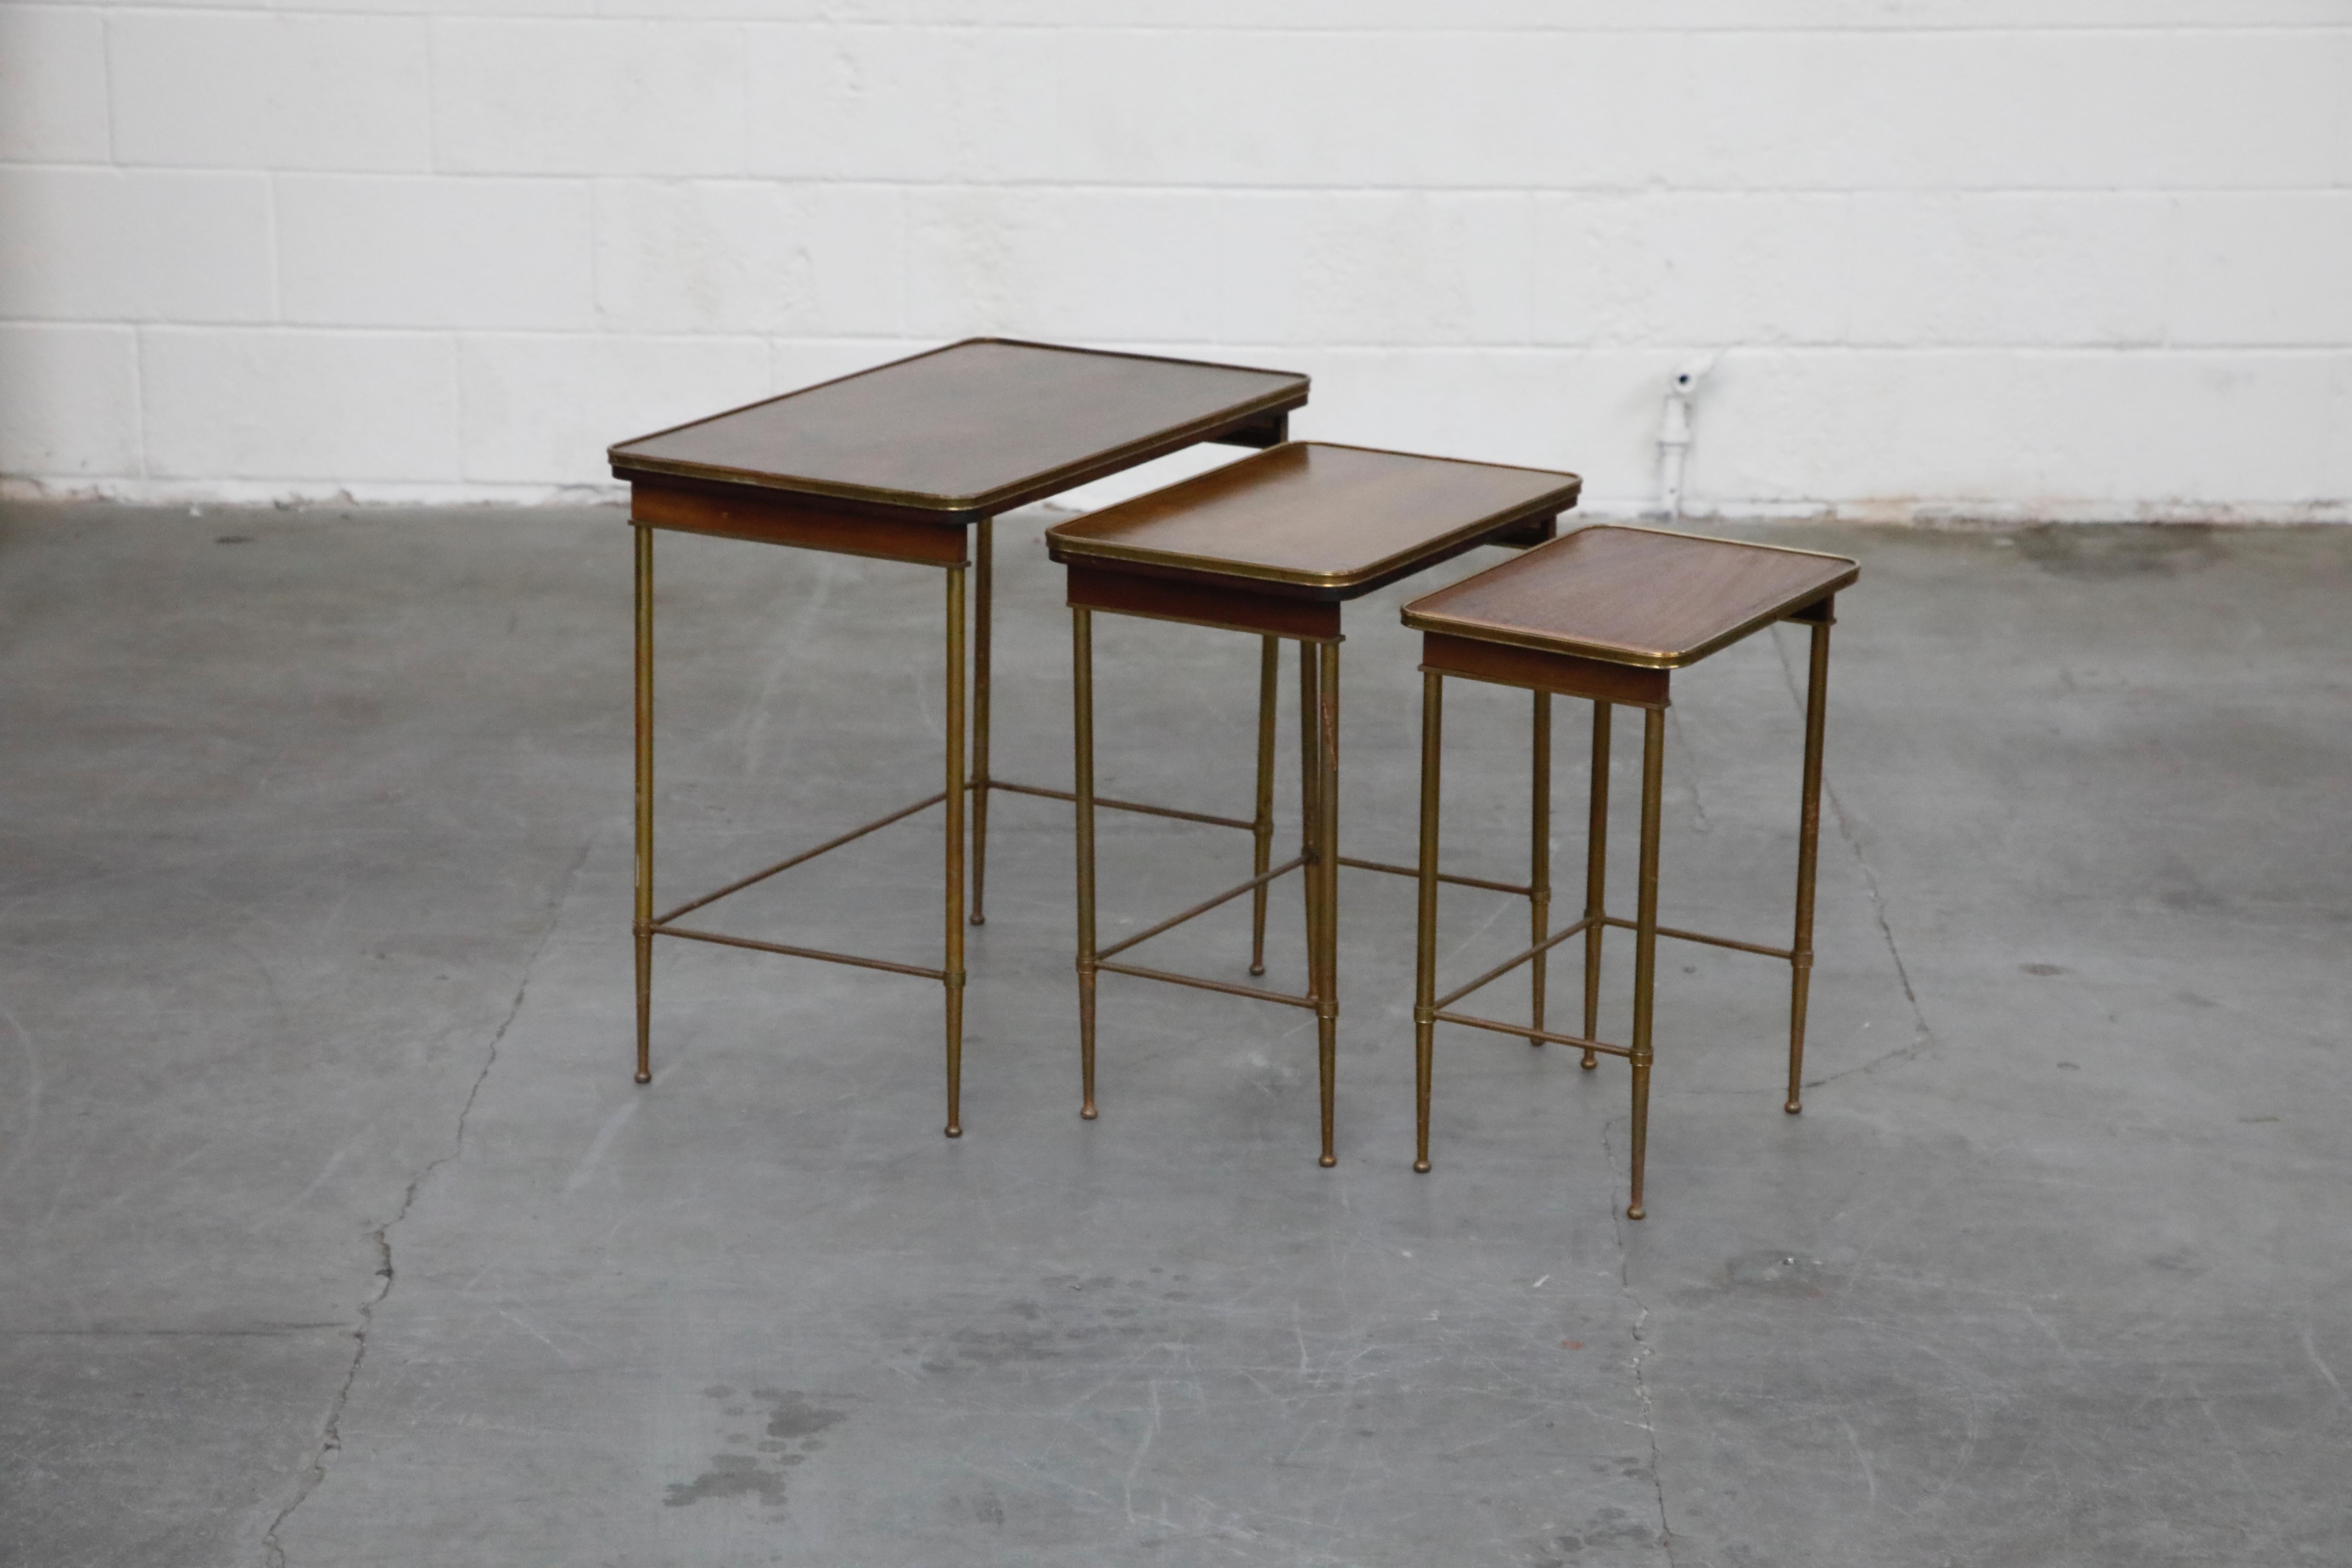 An attractive set of three (3) Mid-Century Modern nesting tables. This set of nesting tables is in its original beautiful finish with light, attractive patina throughout. Would look excellent in almost any style of decor, including Hollywood